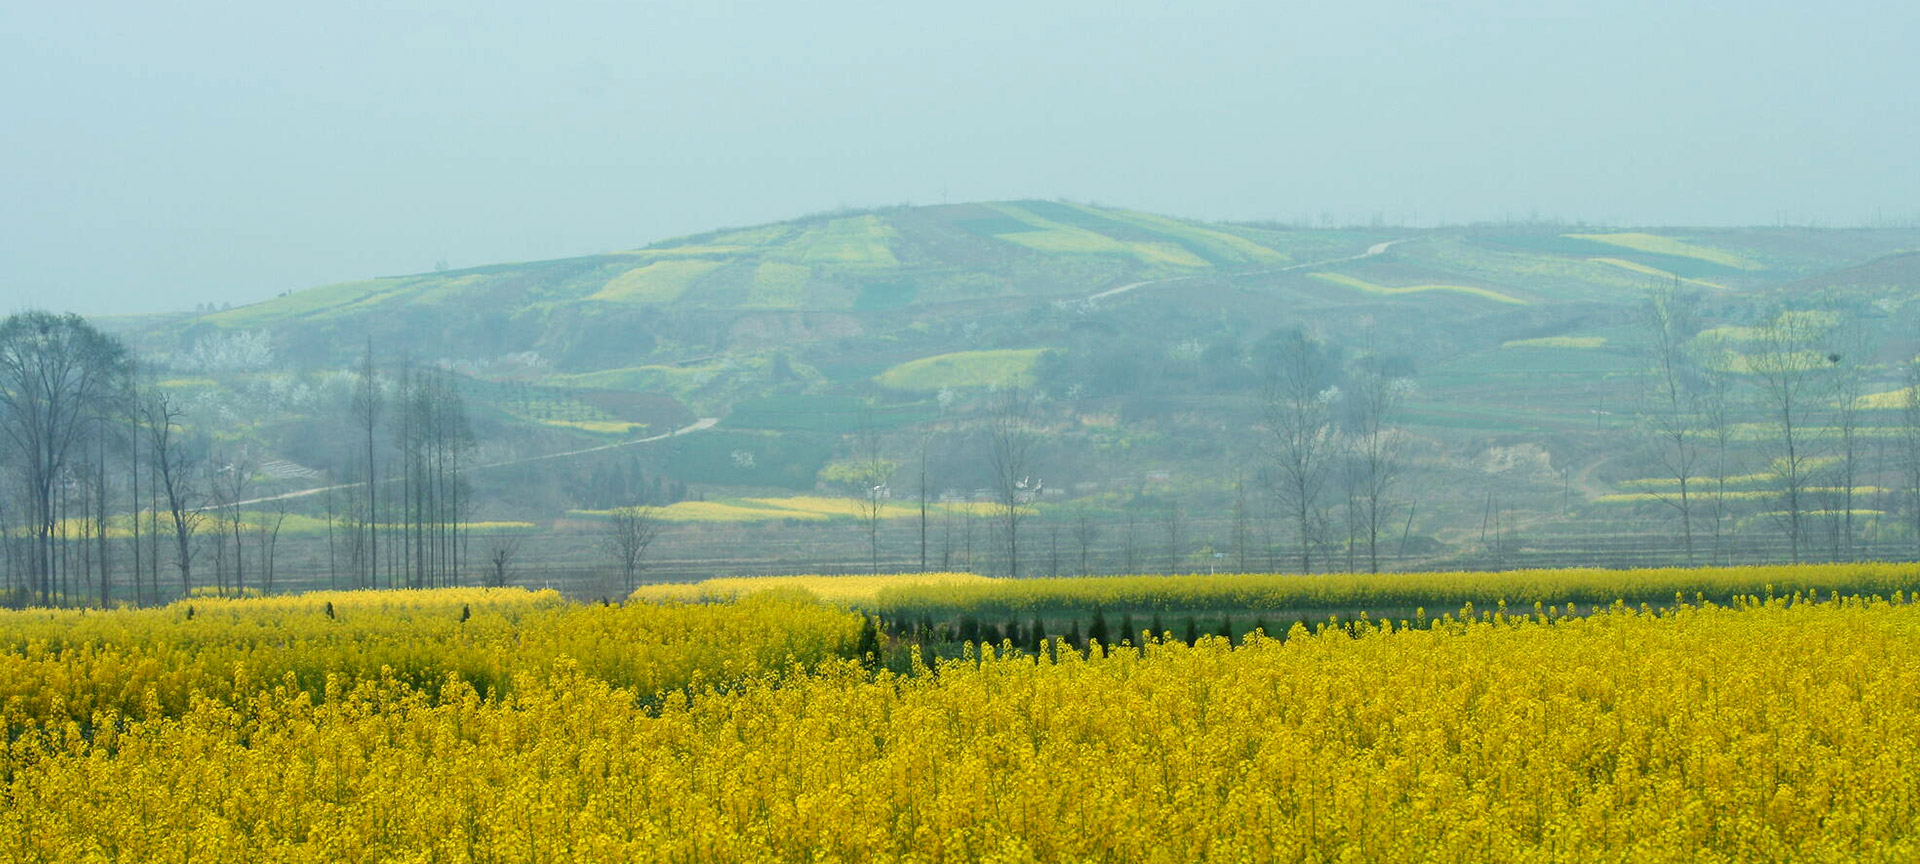 A foggy open field filled with yellow flowers. In the background stands a tall green mountain. 